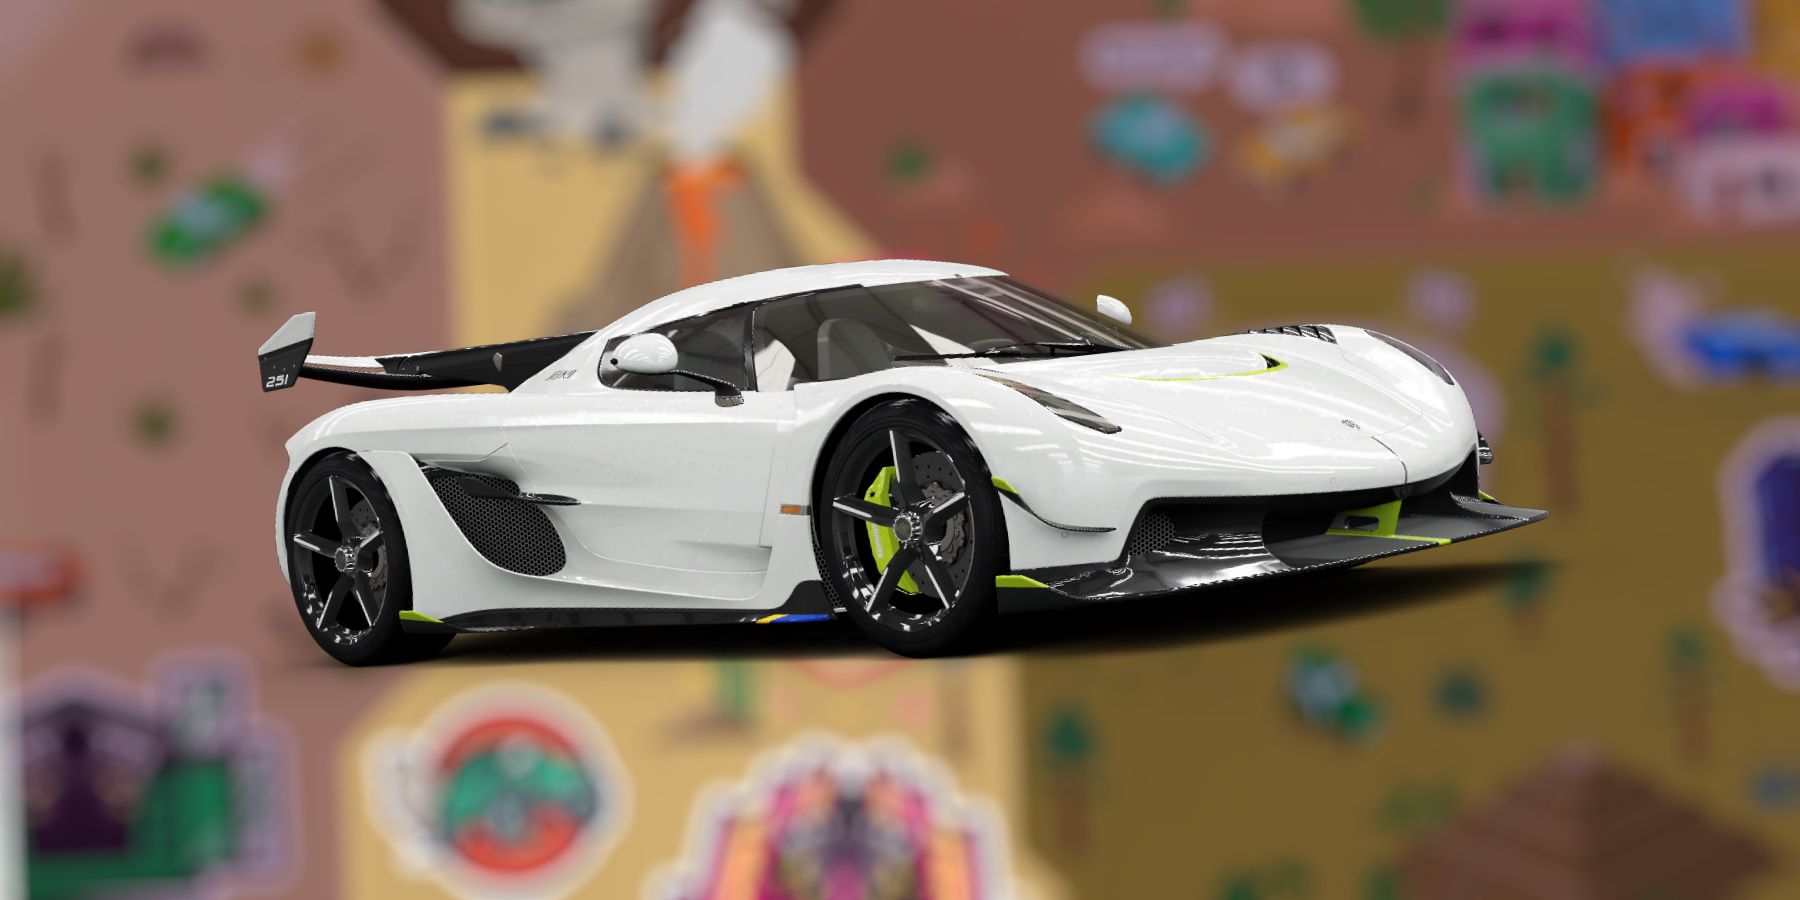 forza horizon 5 - fastest car in the game - koenigsegg jesko - how to unlock for free - youtube on fastest cars in forza horizon 5 tuned